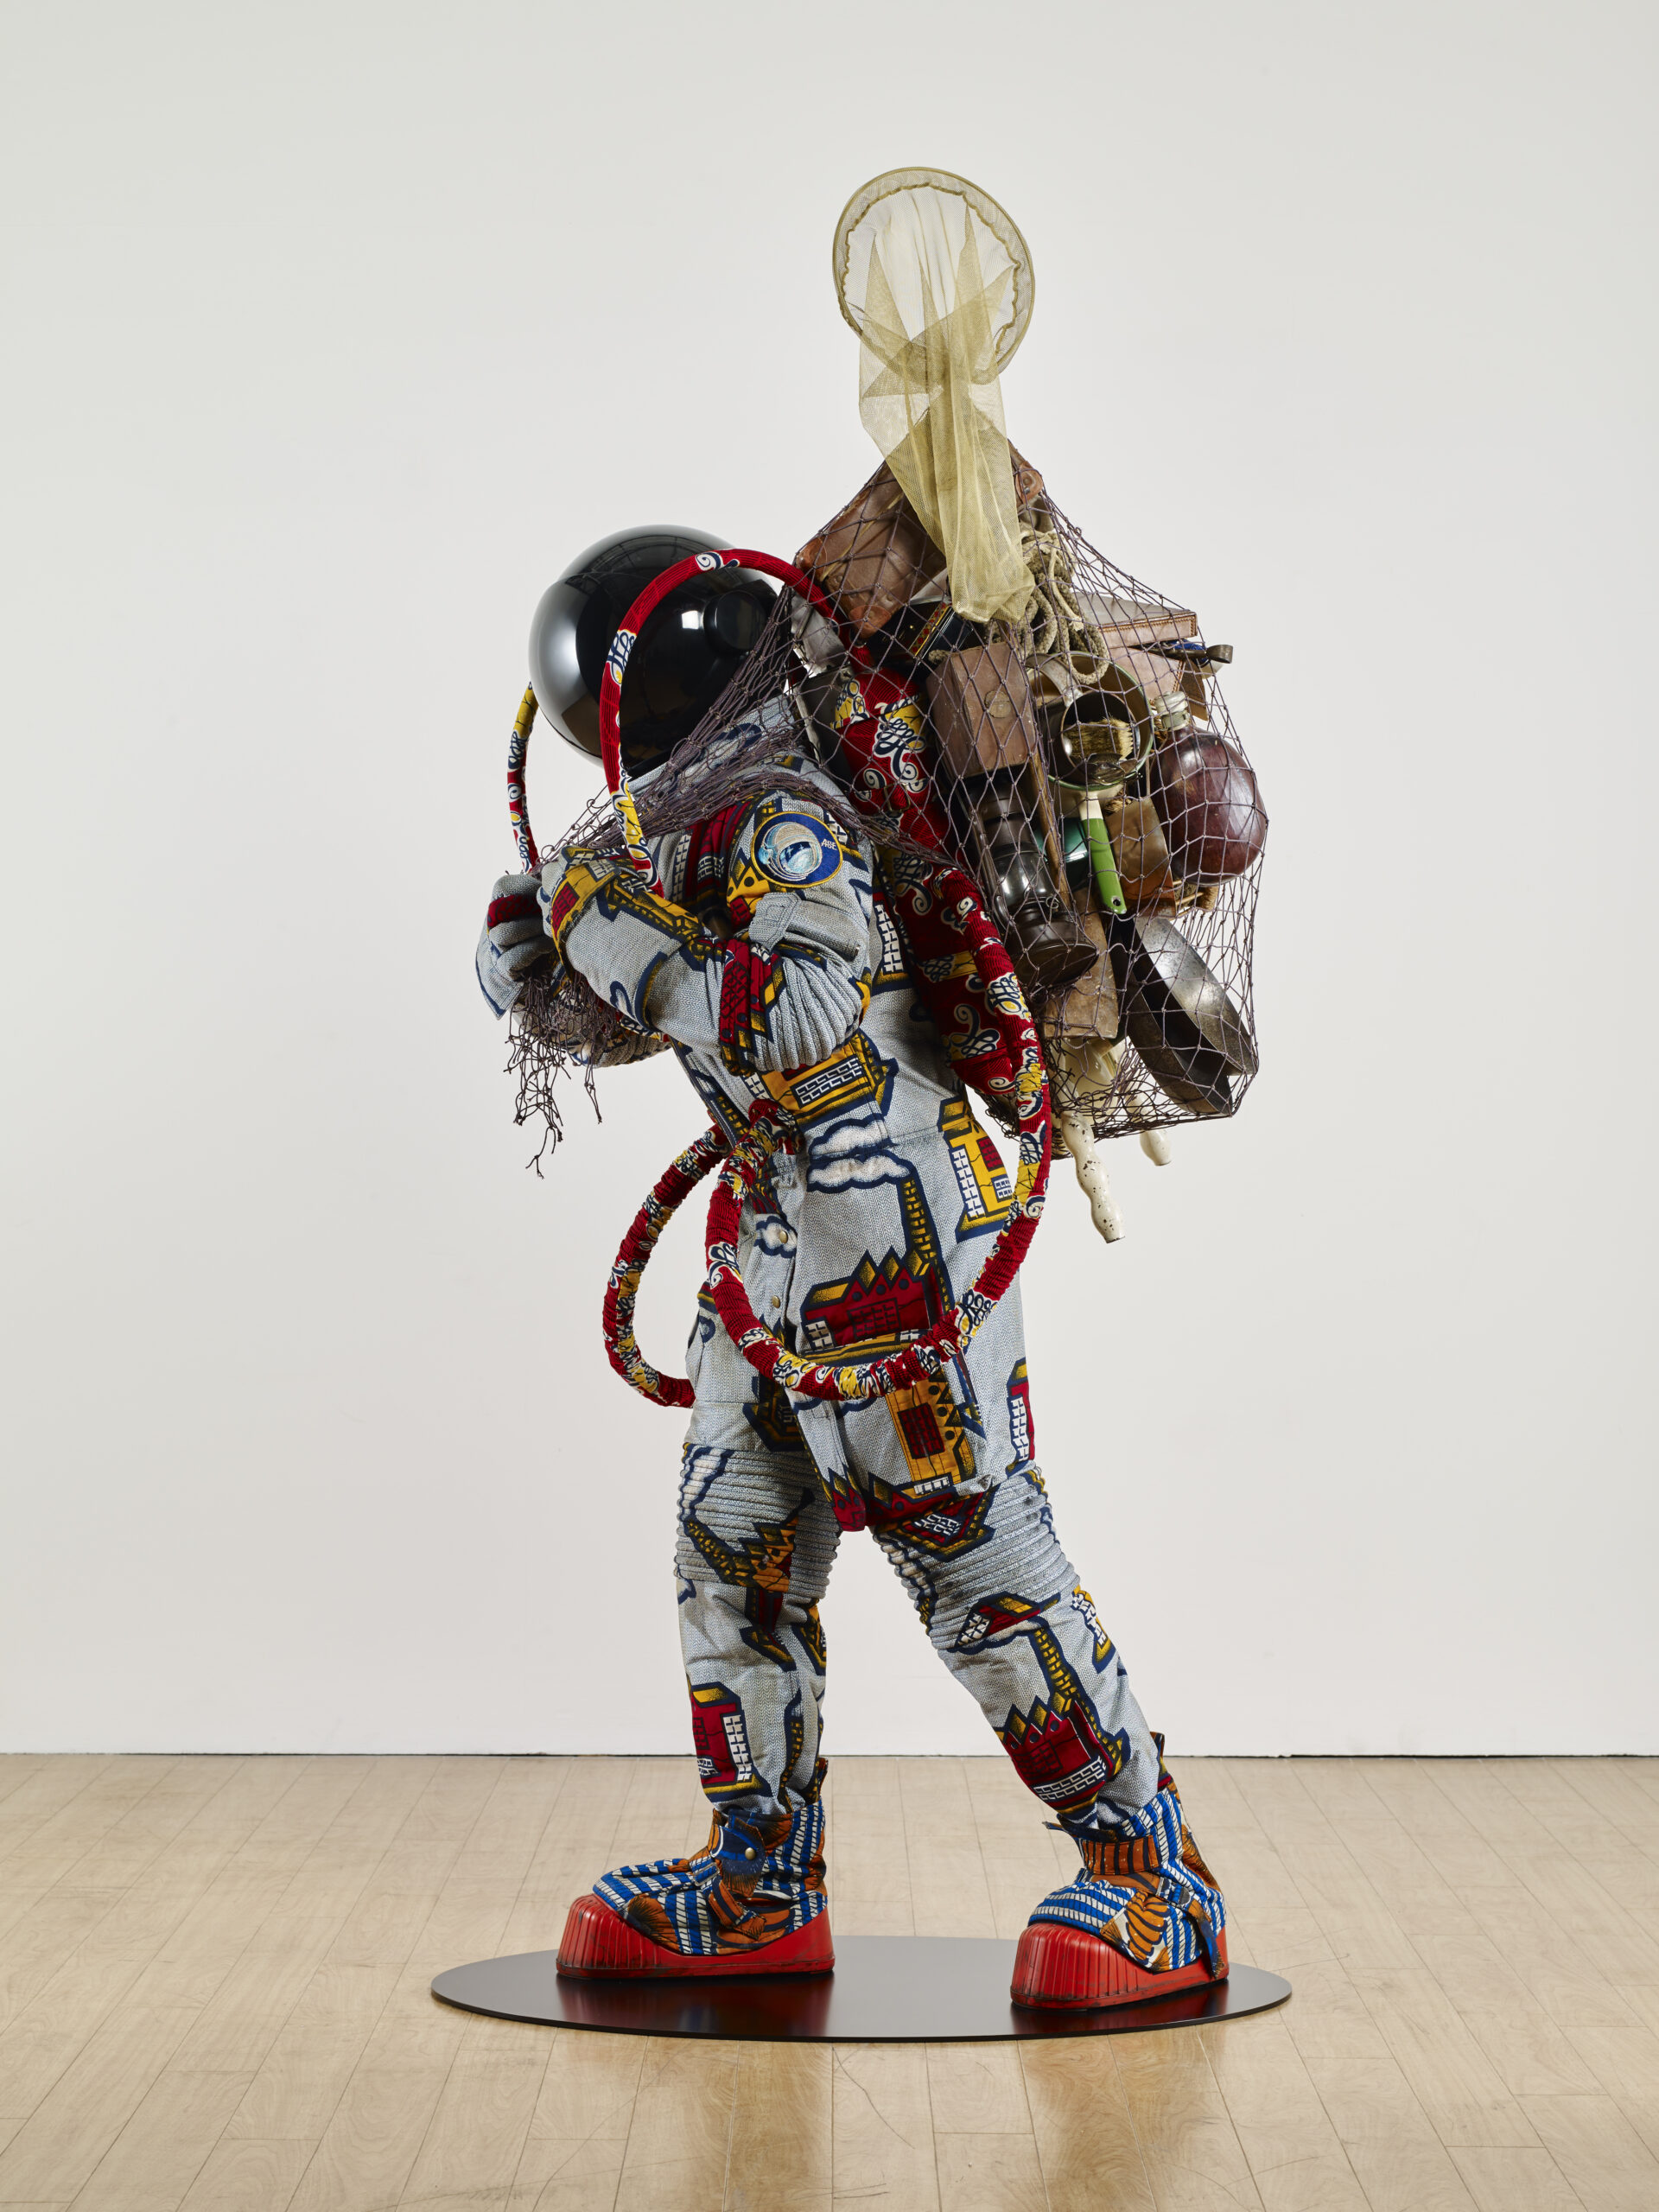 Yinka Shonibare (London, England, 1962 - Lives in London) Refugee Austronaut II (2016) Fibreglass mannequin, Dutch wax printed cotton textile, net, possessions, astronaut helmet, moon boots and steel baseplate 210 x 90 x 103 cm Courtesy the Artist and James Cohan Gallery, New York / Photo Stephen White & Co. / © Yinka Shonibare CBE